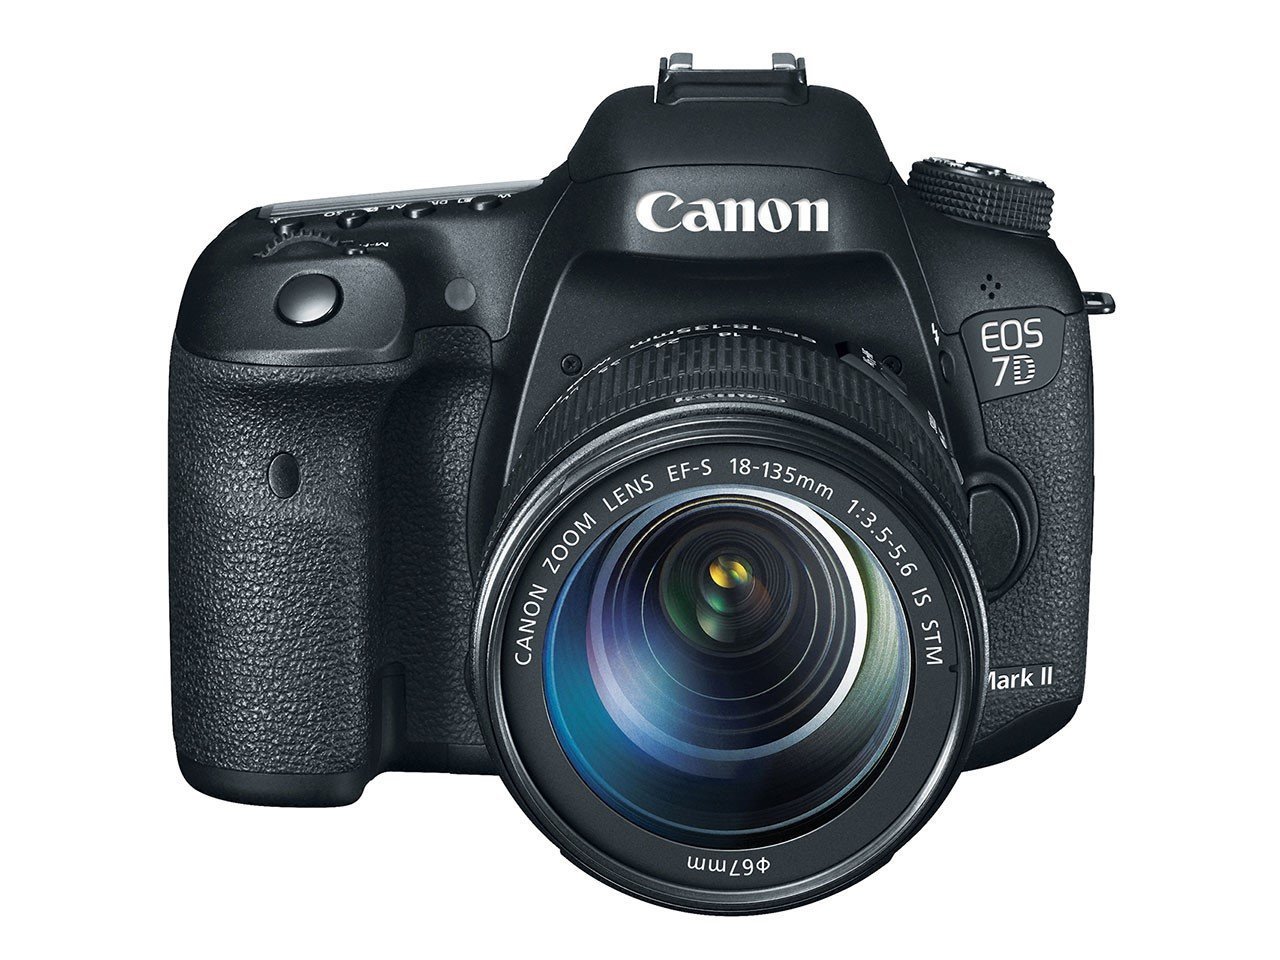 Canon 7d user manual download